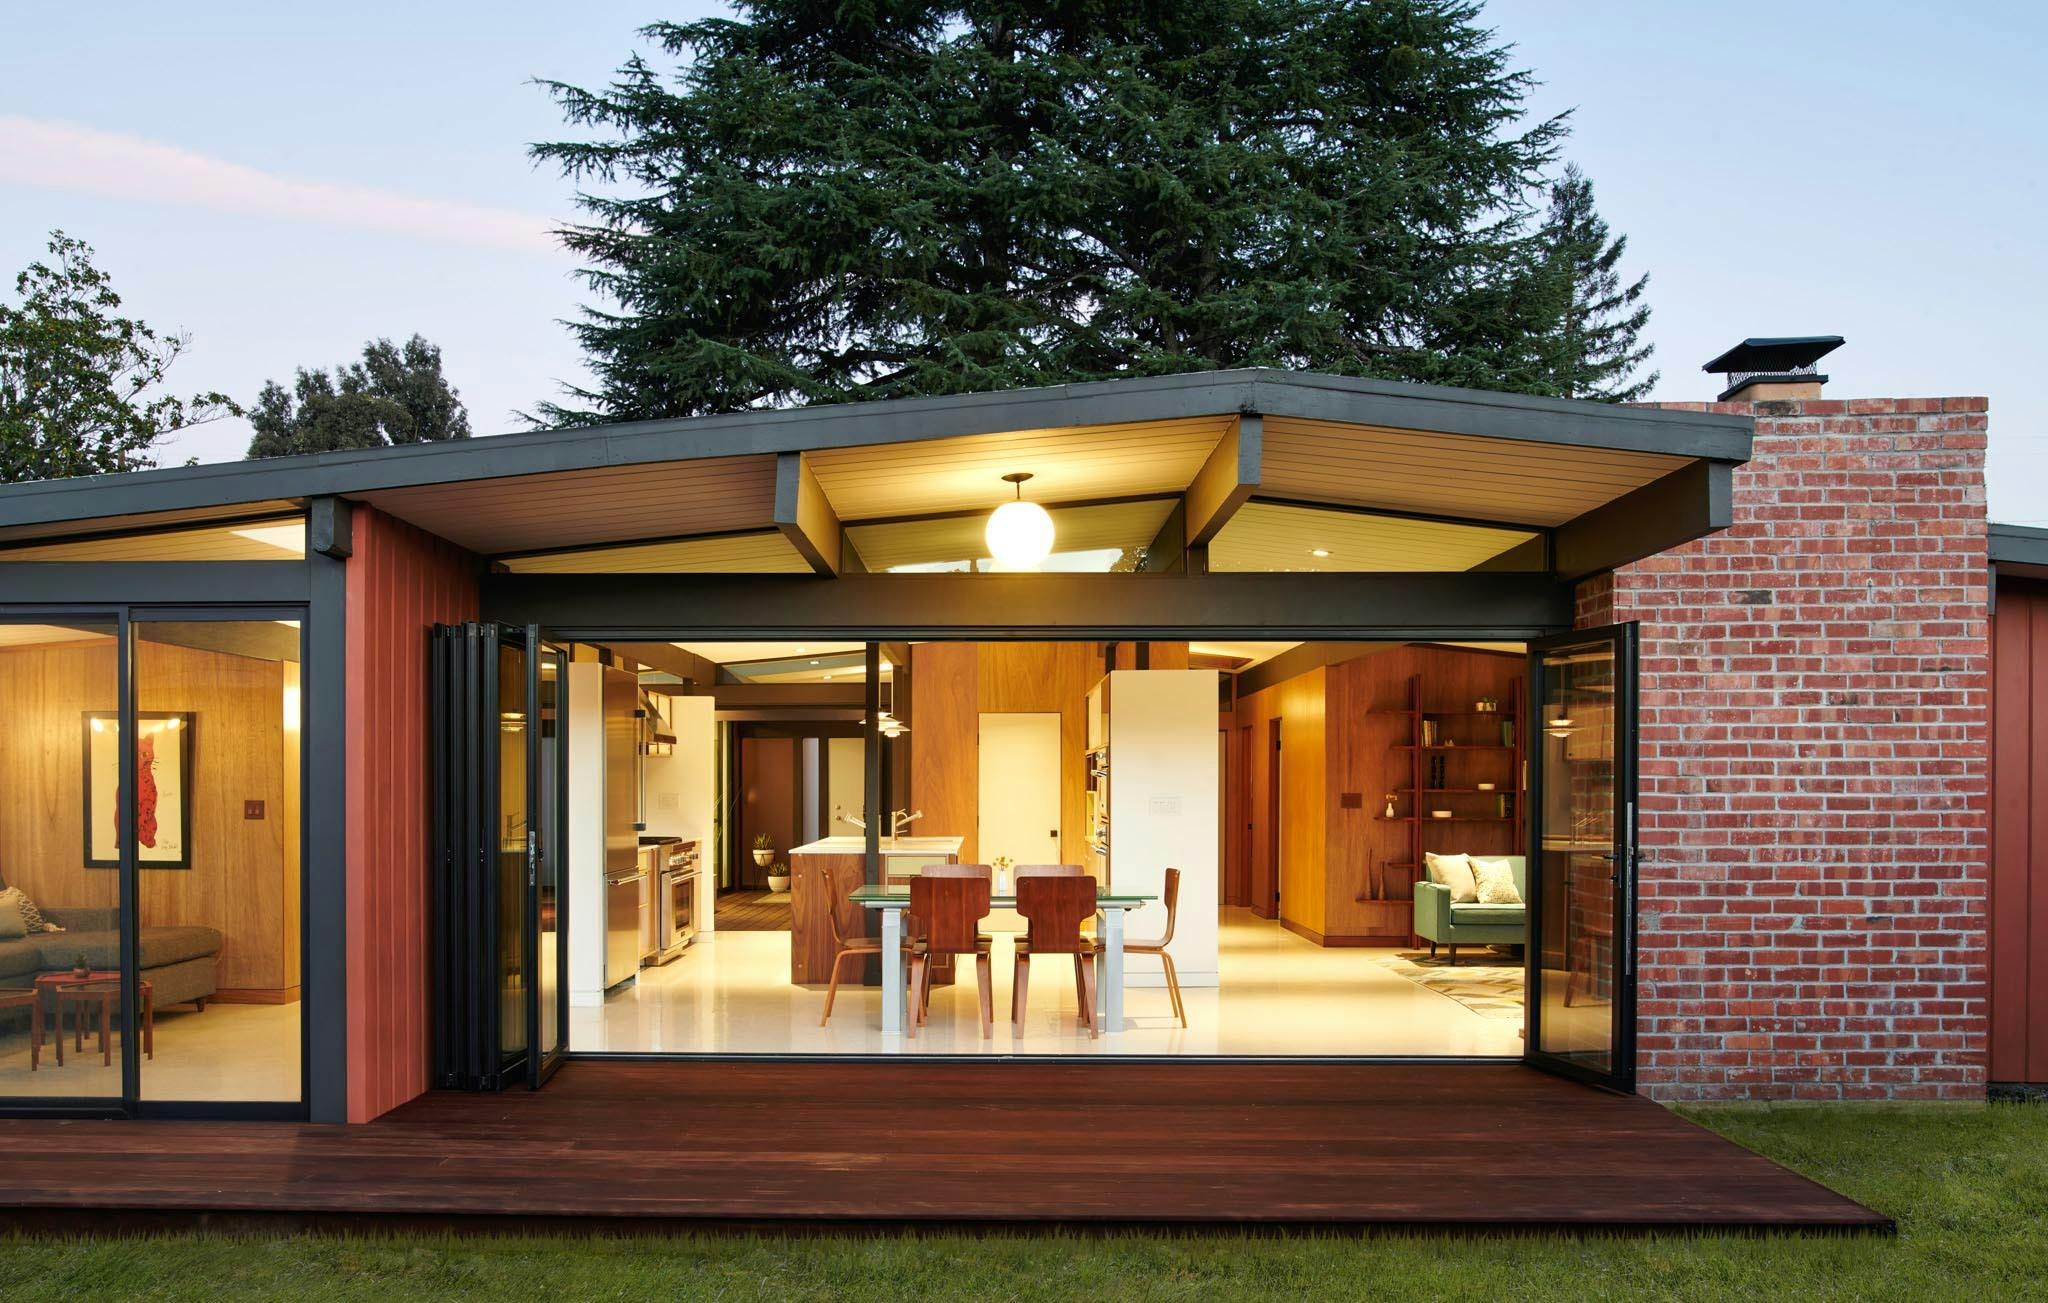 Eichler homes remodel with folding glass wall to let the outdoors in